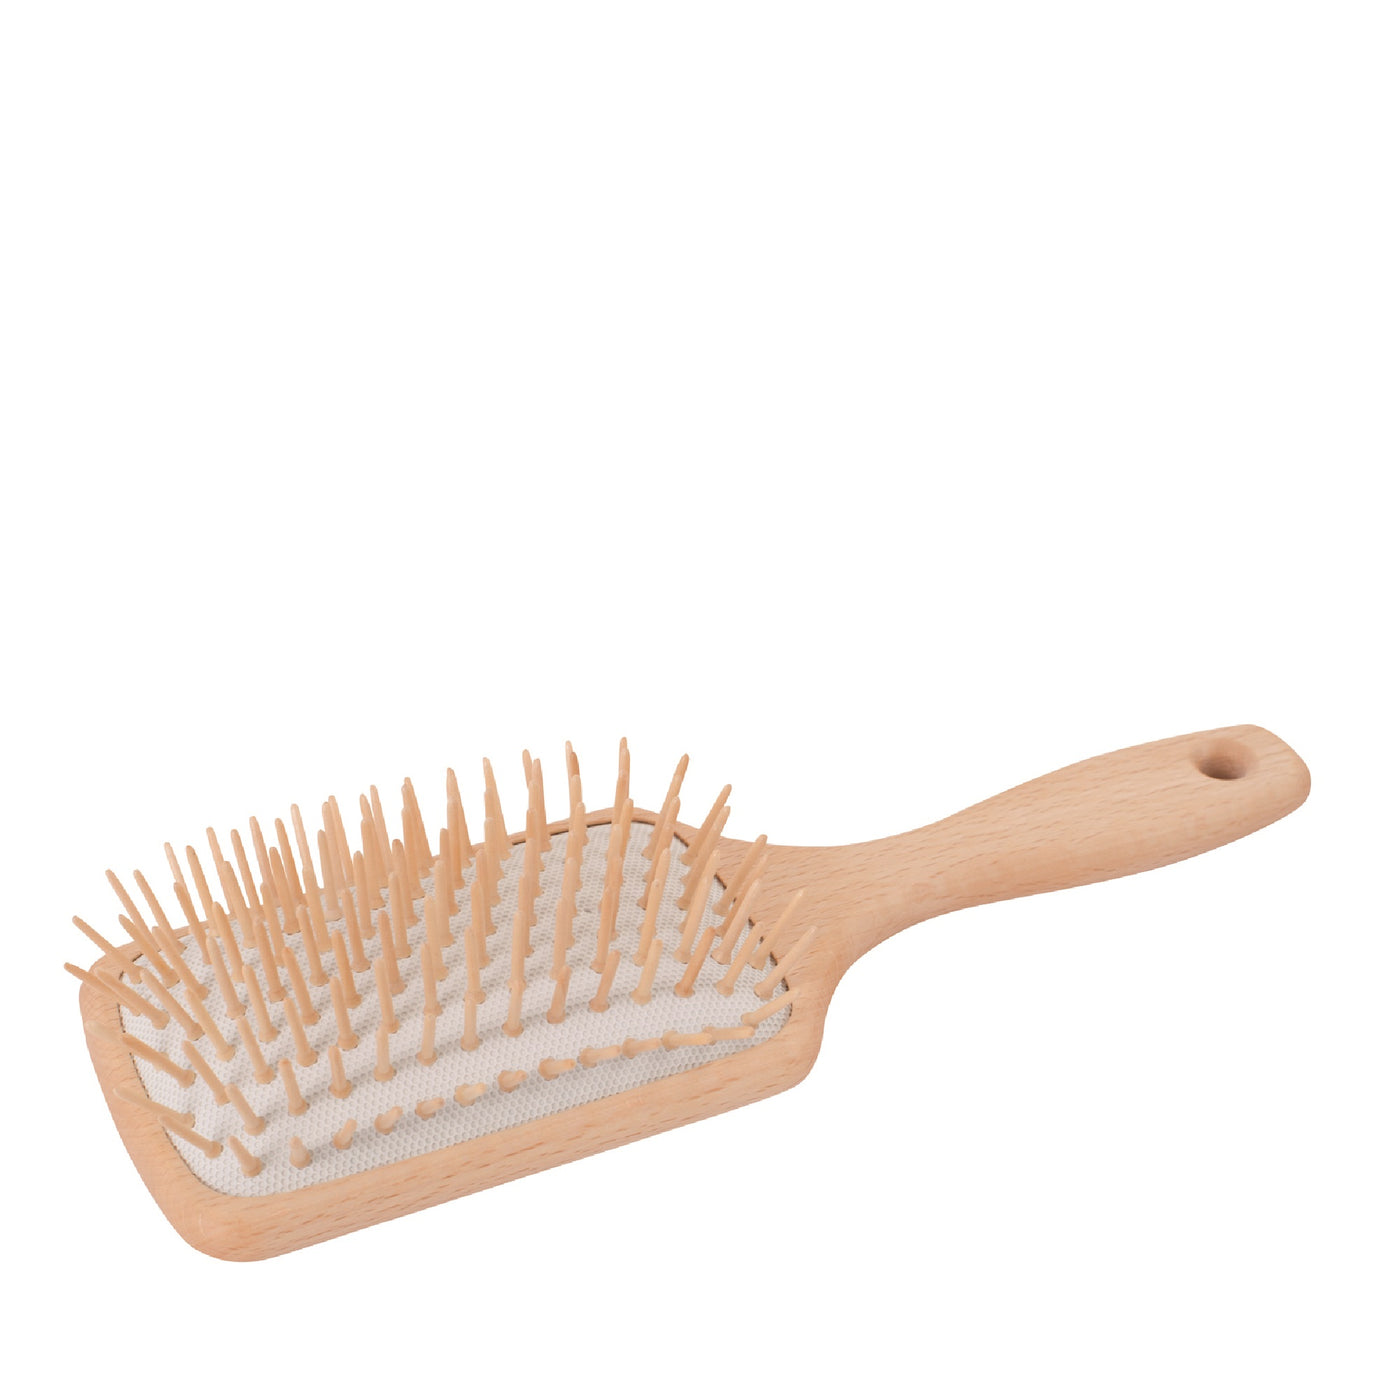 Rectangular Paddle Brush - with wooden pins